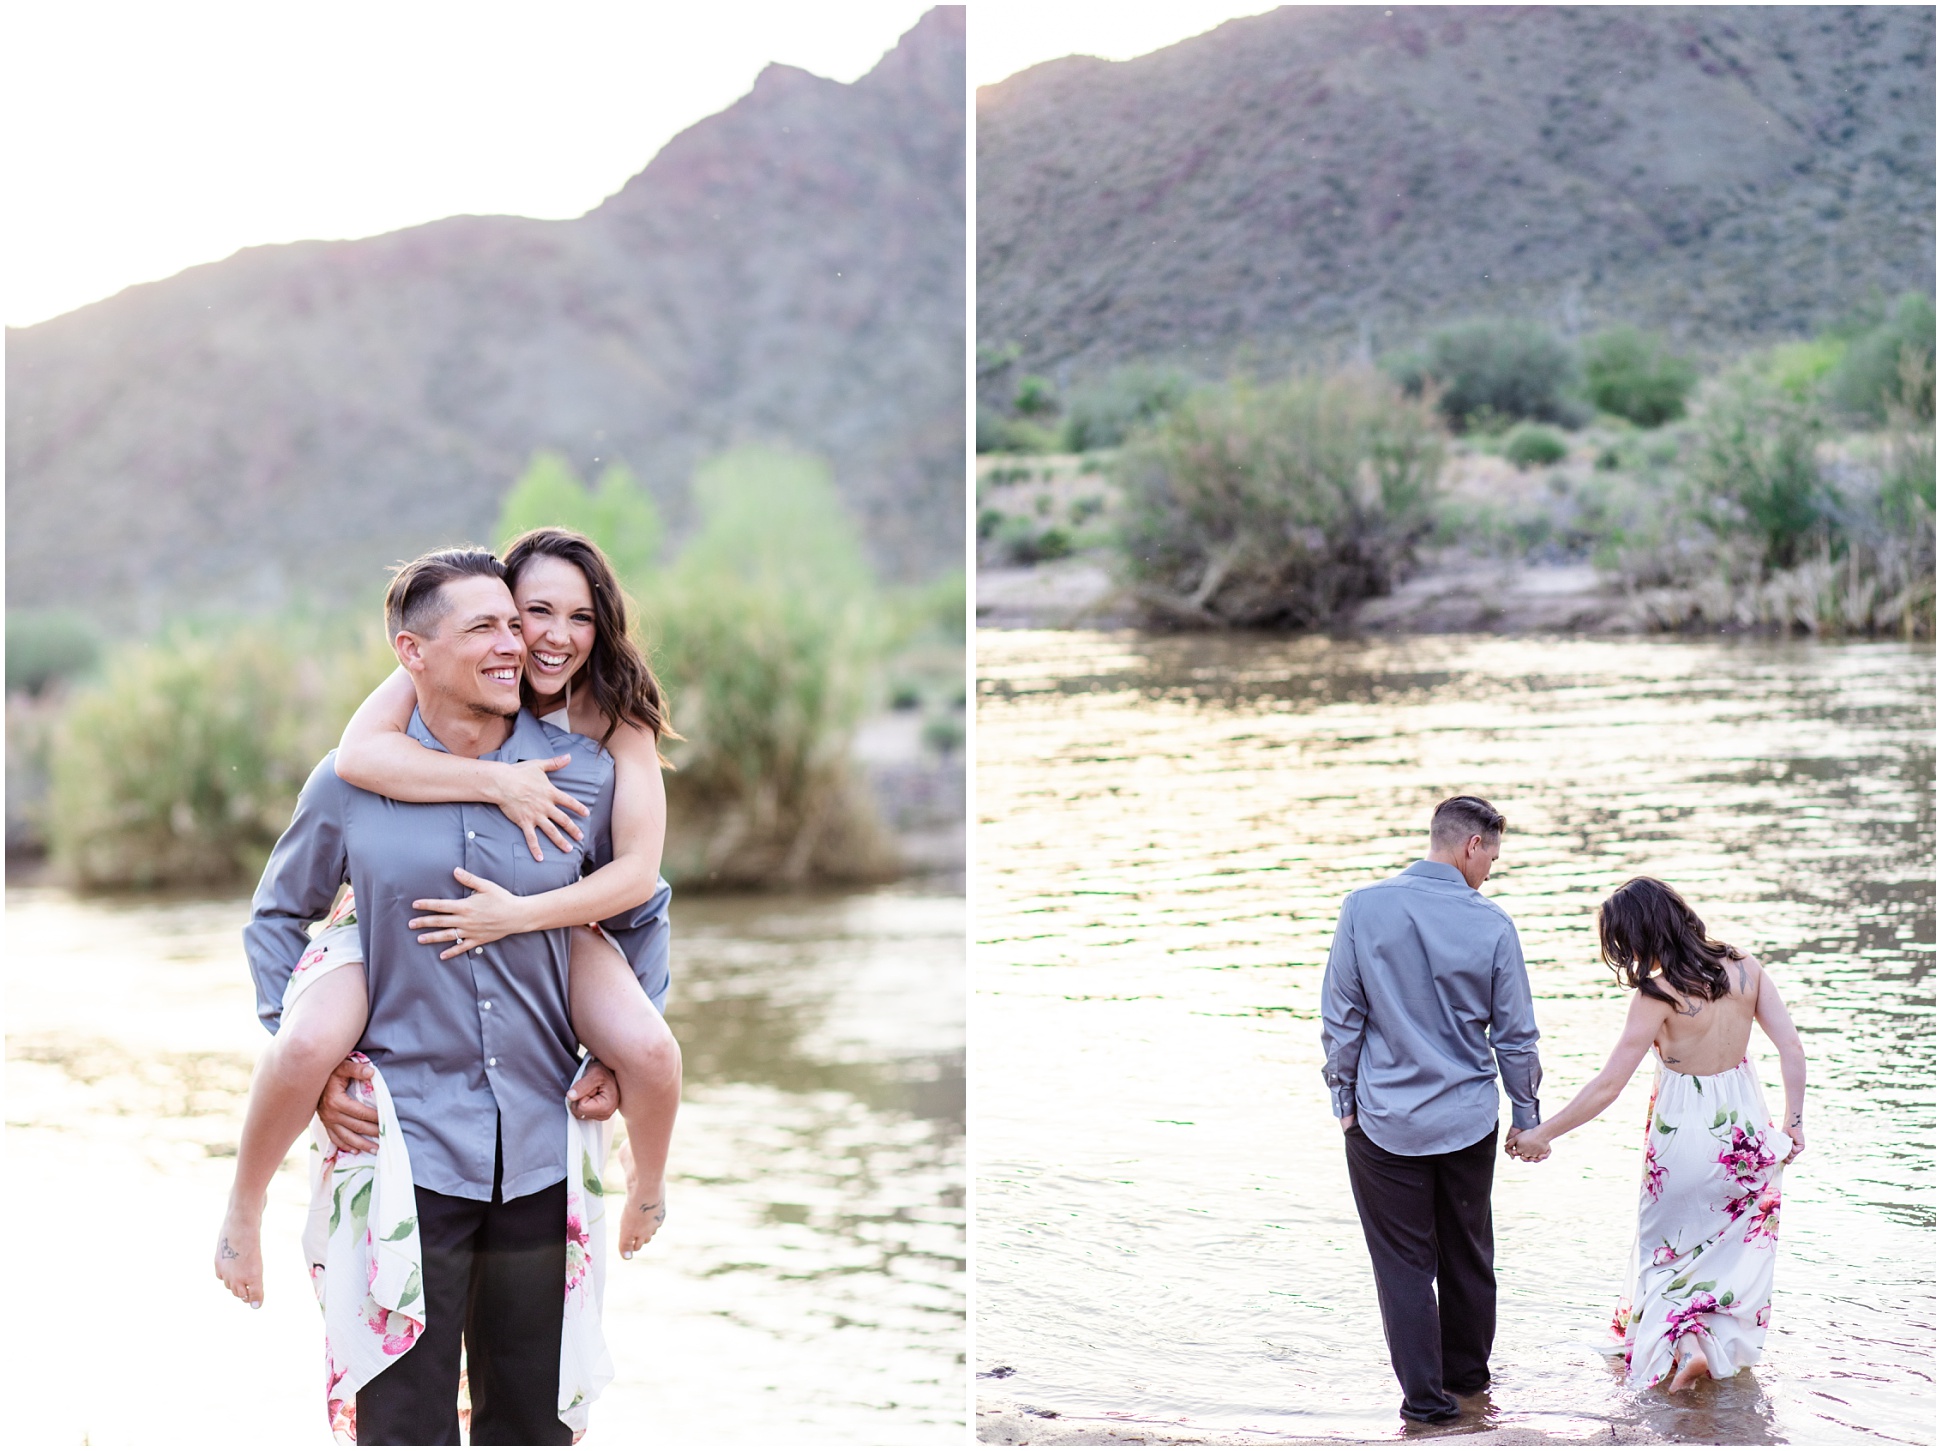 Two Images of Jessica and Michael playing in the water at the Salt River